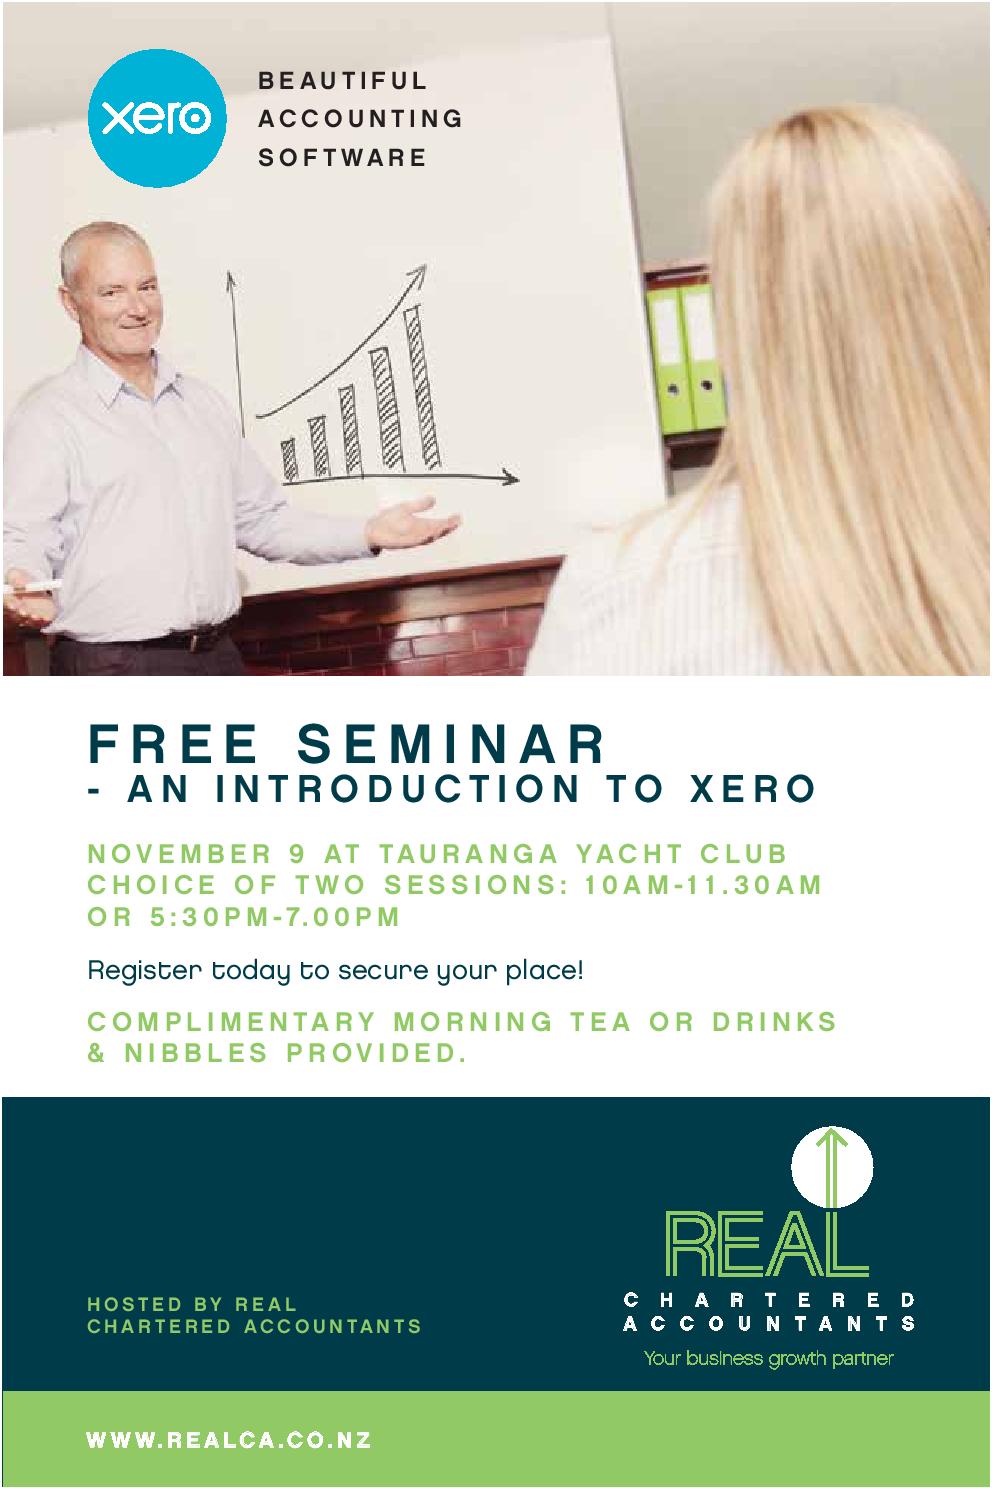 Thank you for attending our Xero Seminars!